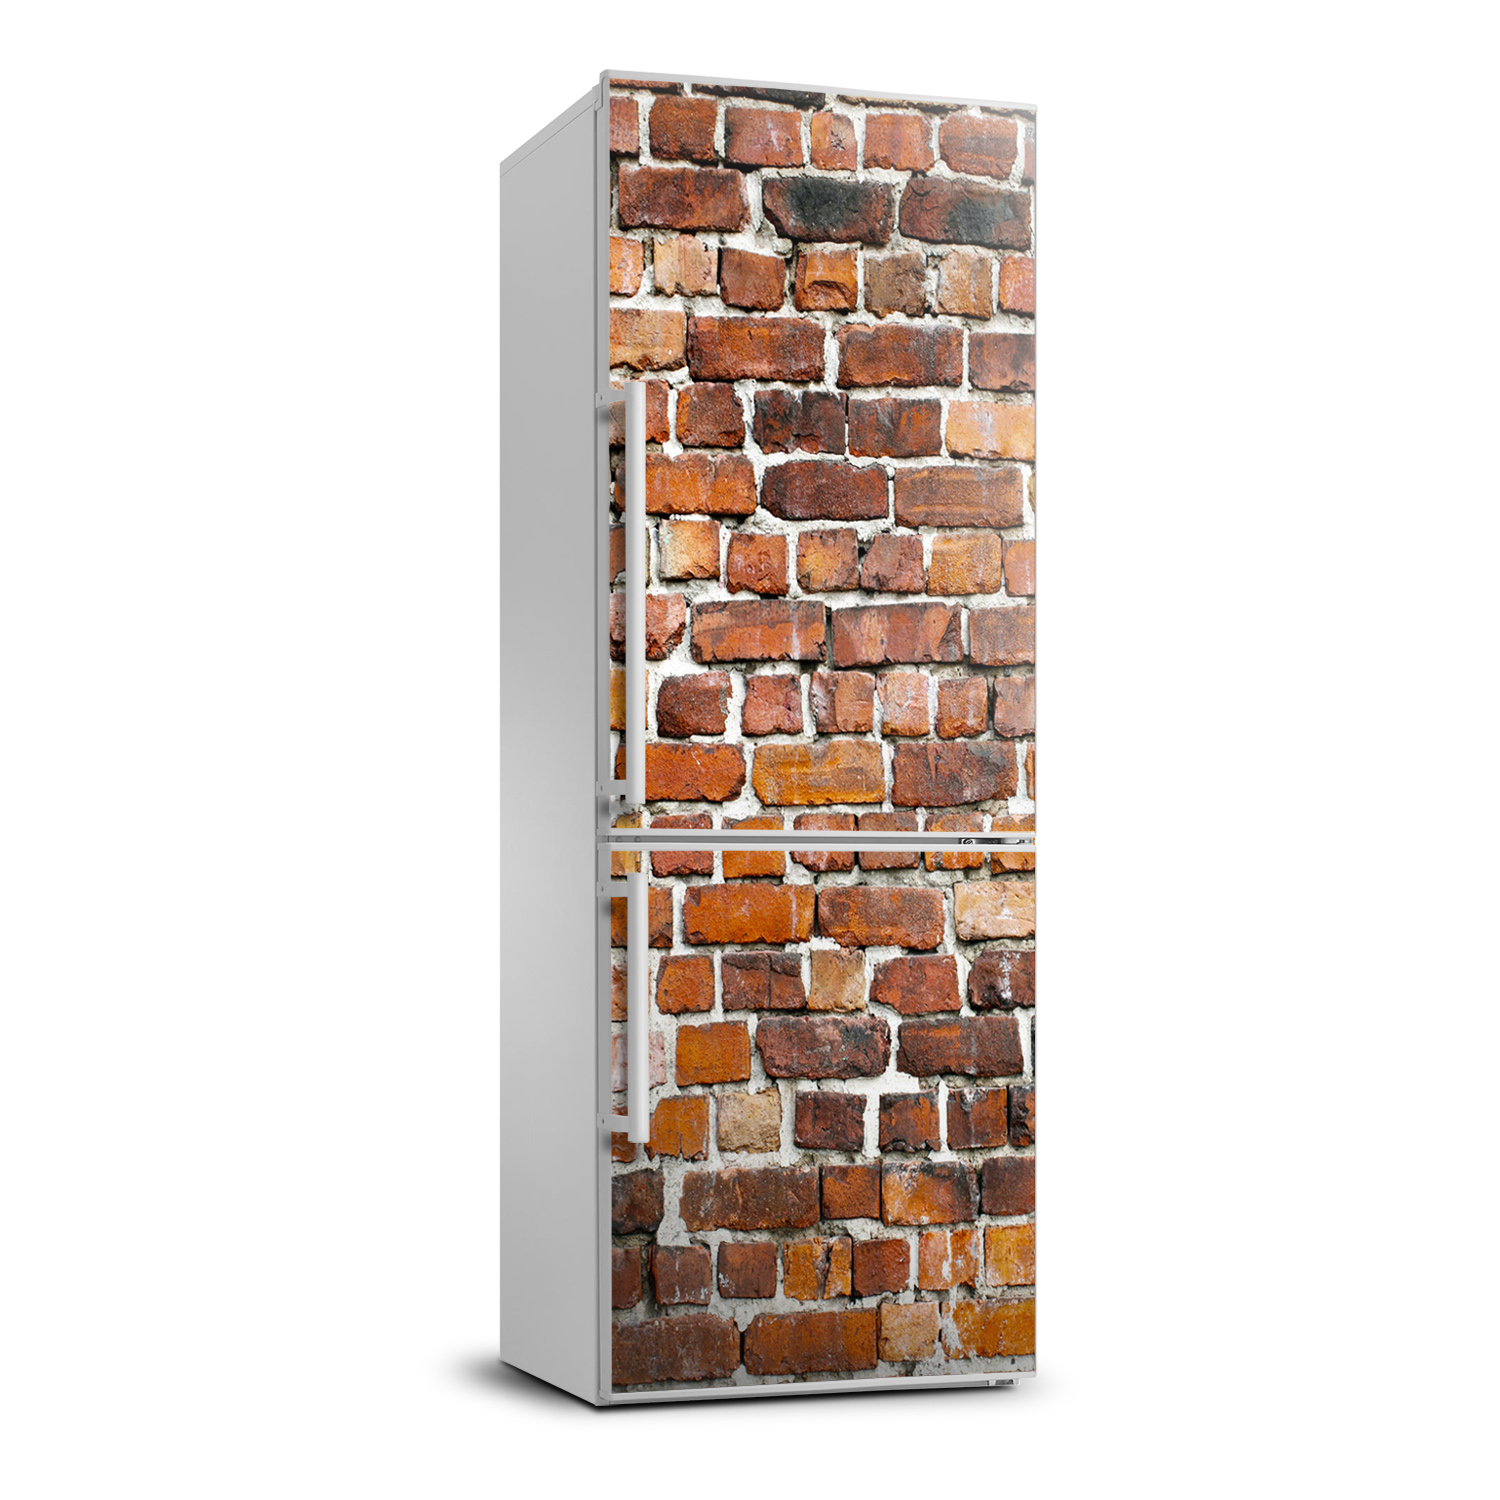 Magnet Sticker Refrigerator Wall wrap removable Peel /& Stick Decal Brick wall